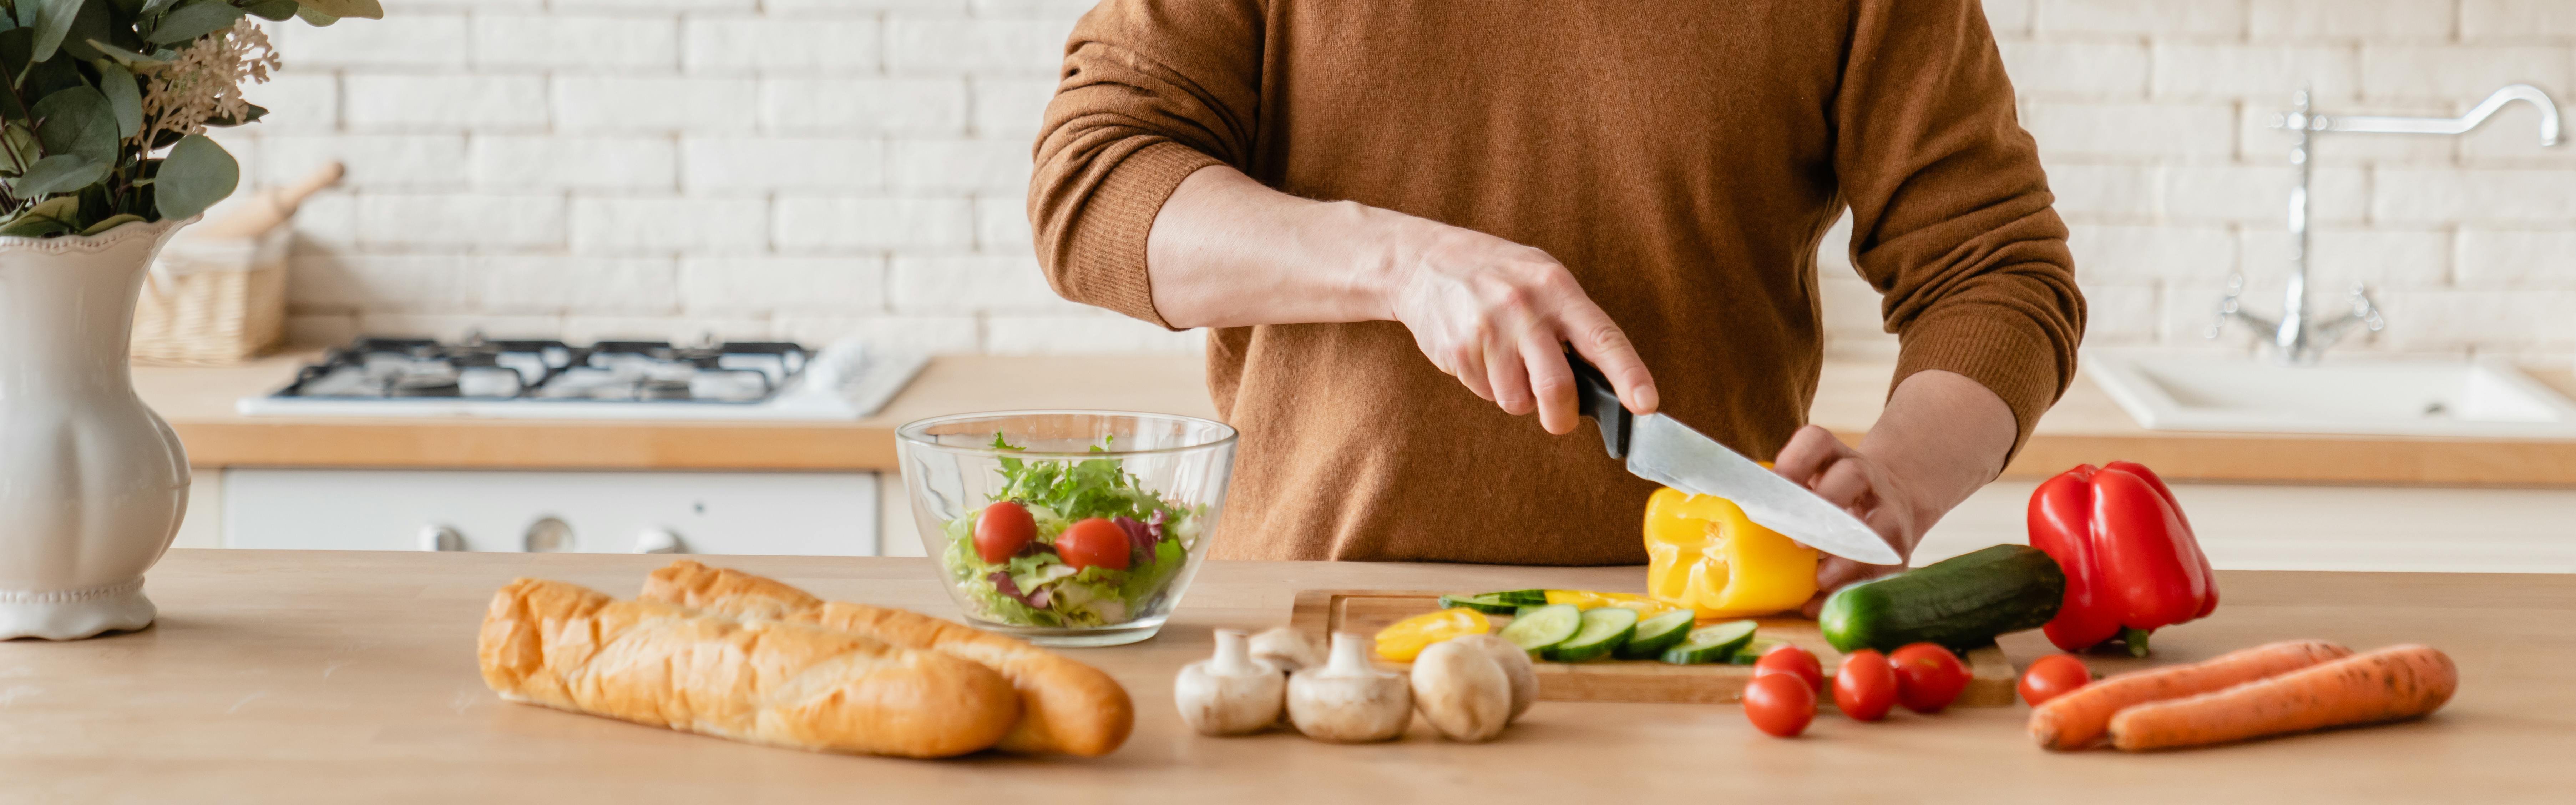 Close up of some hands chopping a bell pepper on a counter with a bowl of salad and some bread laying next to it. 